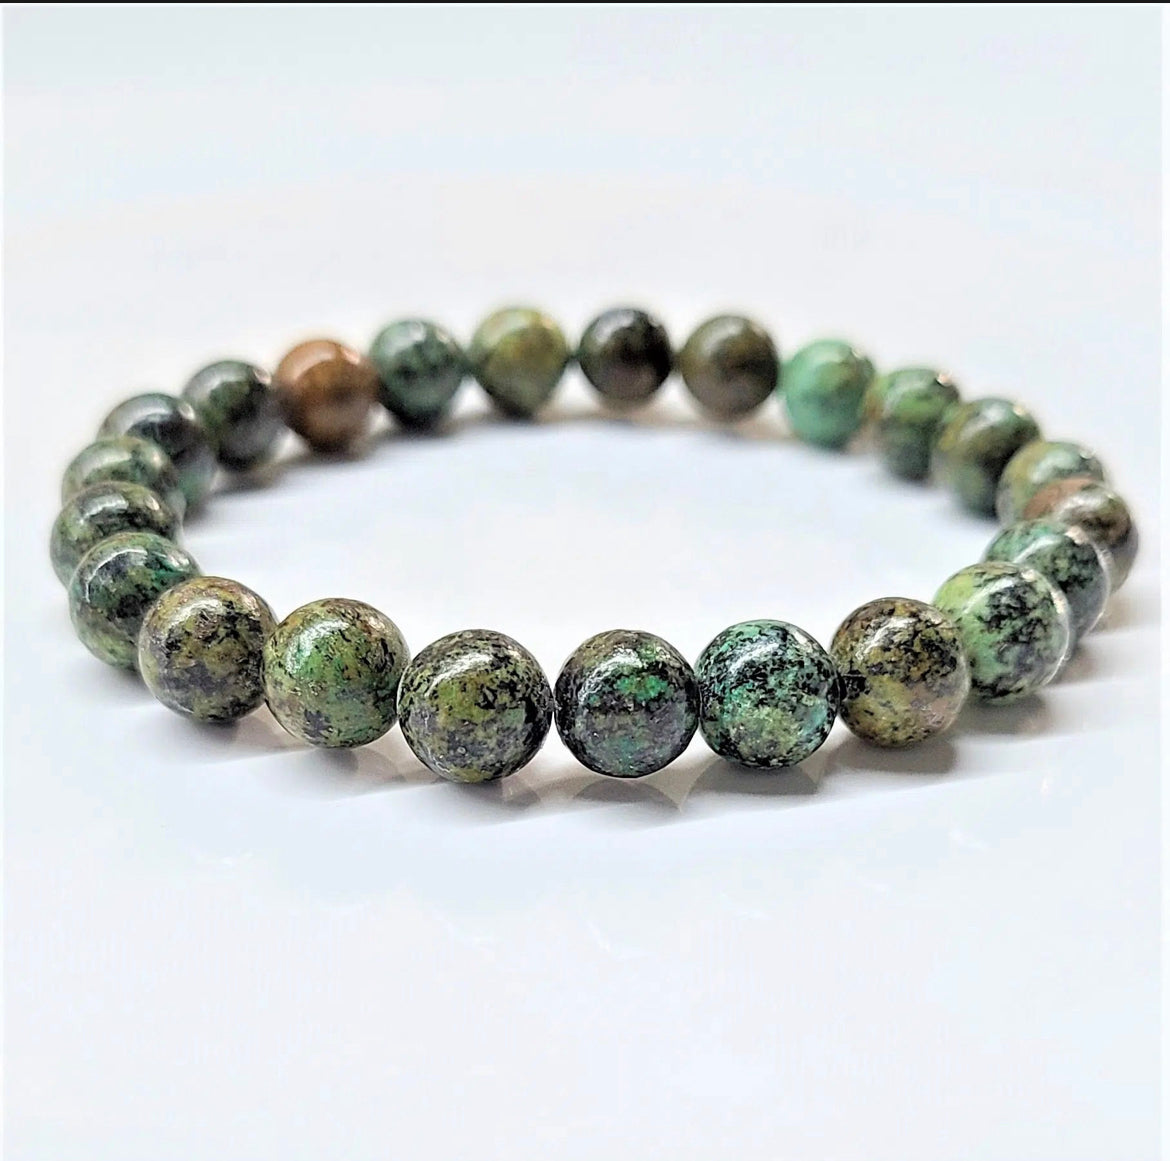 8 mm African Turquoise Stone Bracelet